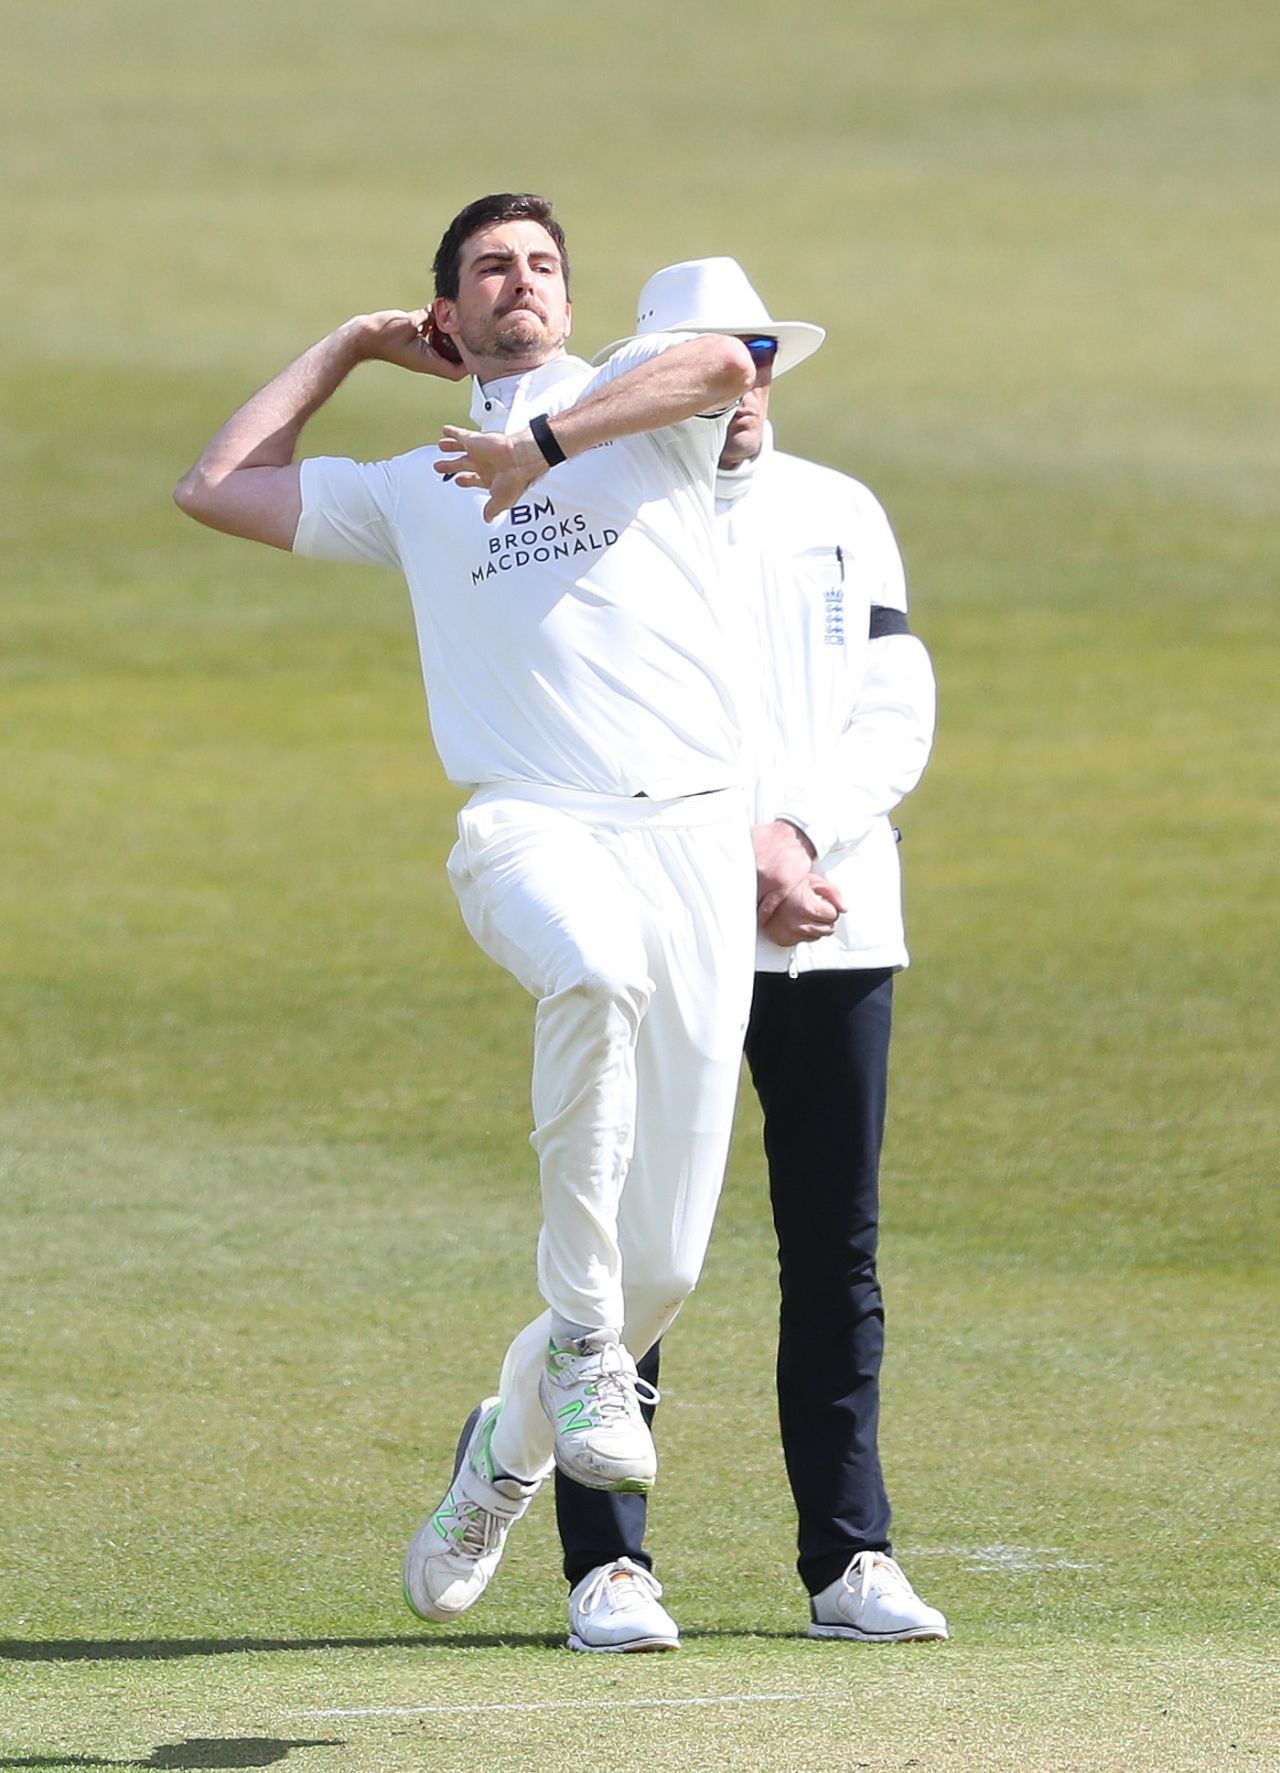 Steven Finn of Middlesex bowls against Hampshire, Cardiff, April 15, 2021